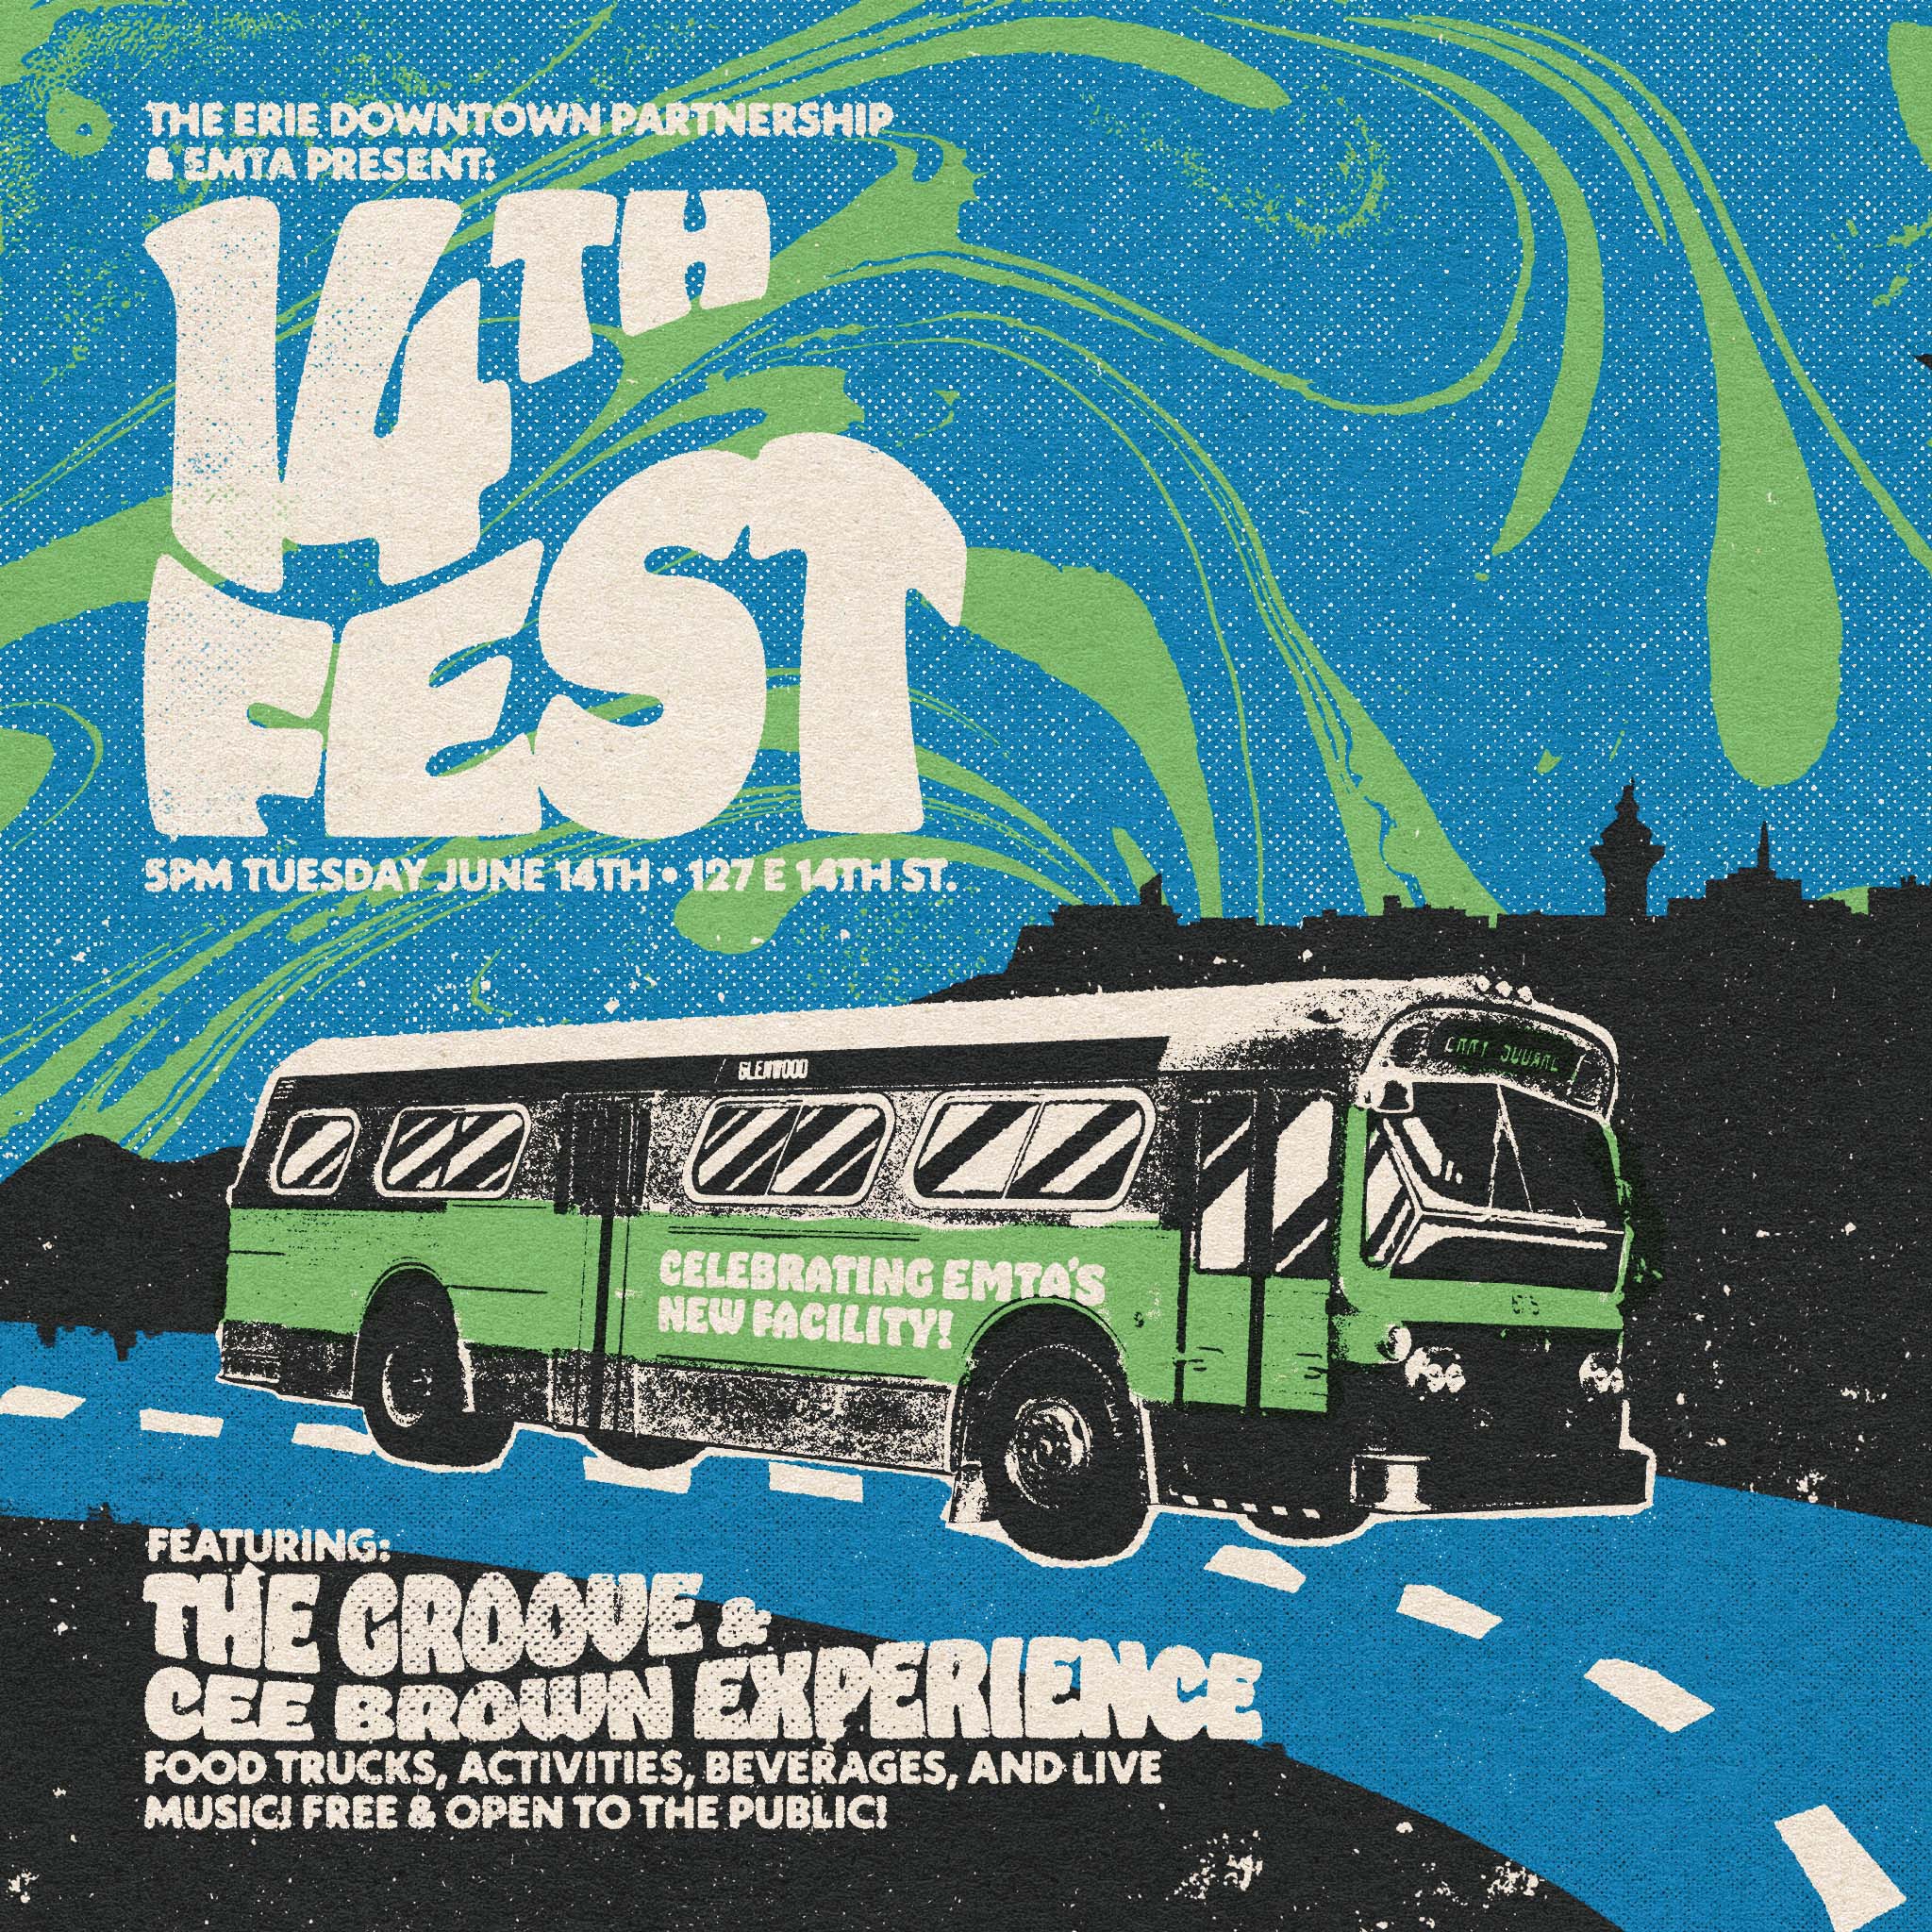 EMTA and EDP Present 14th Fest with CEE Brown Experience and The Groove!